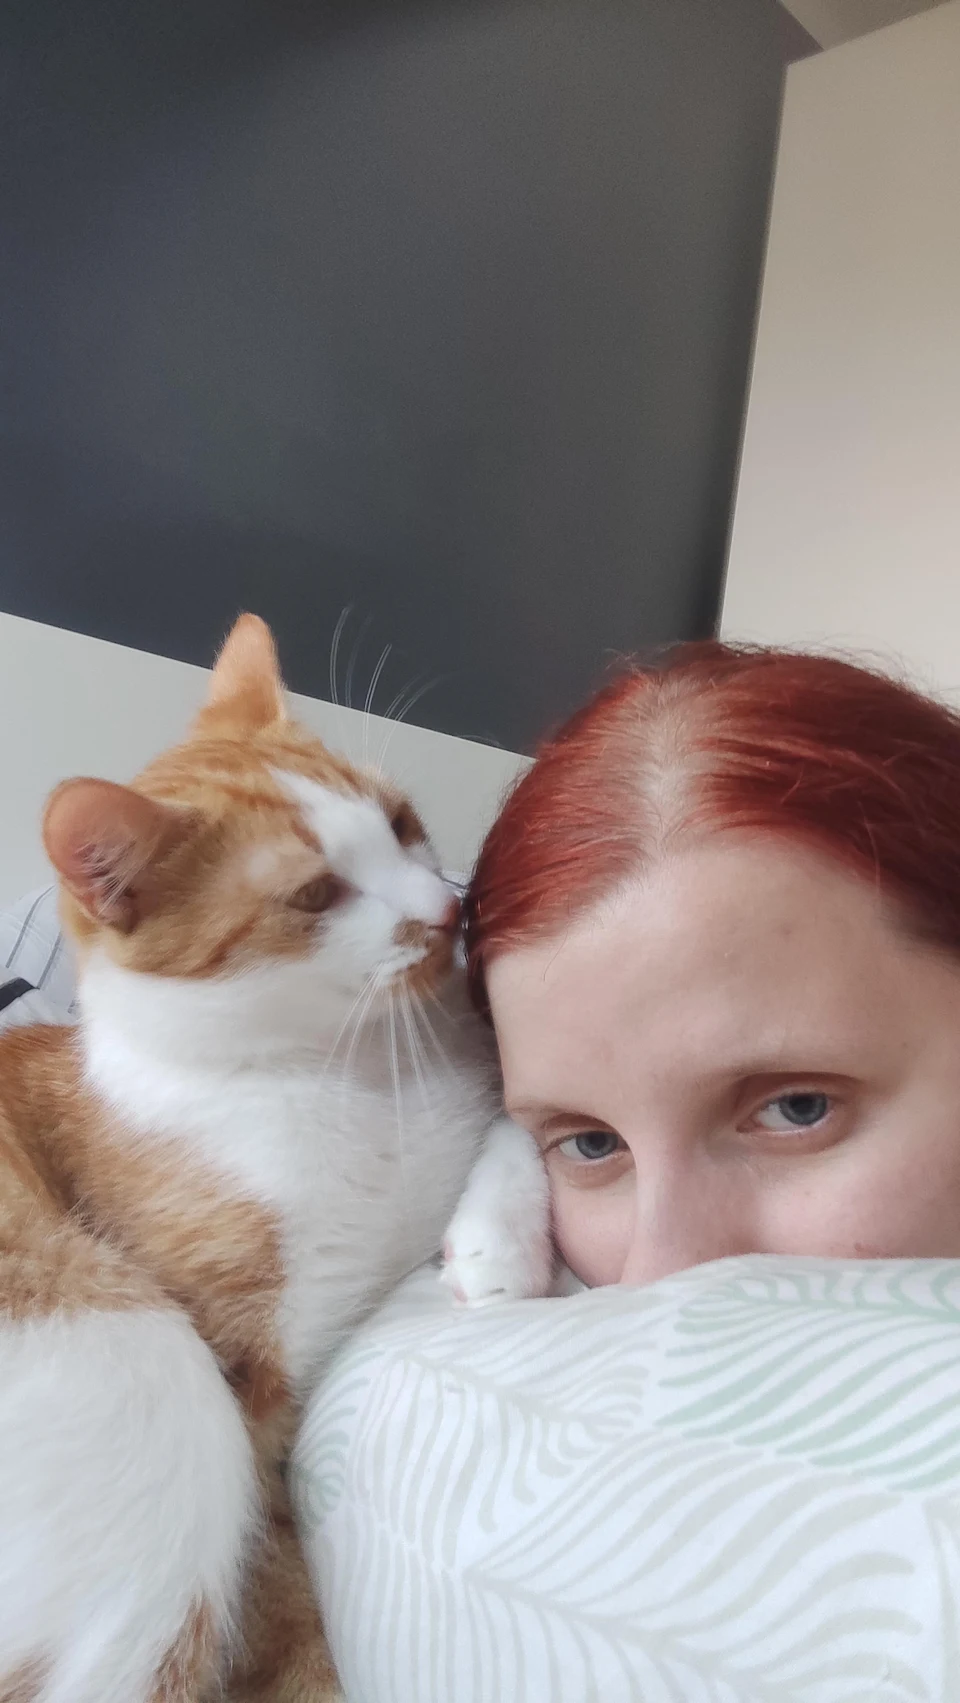 Everyday when I test after work, he comes for cuddles and purrs me relaxing lullabies :)